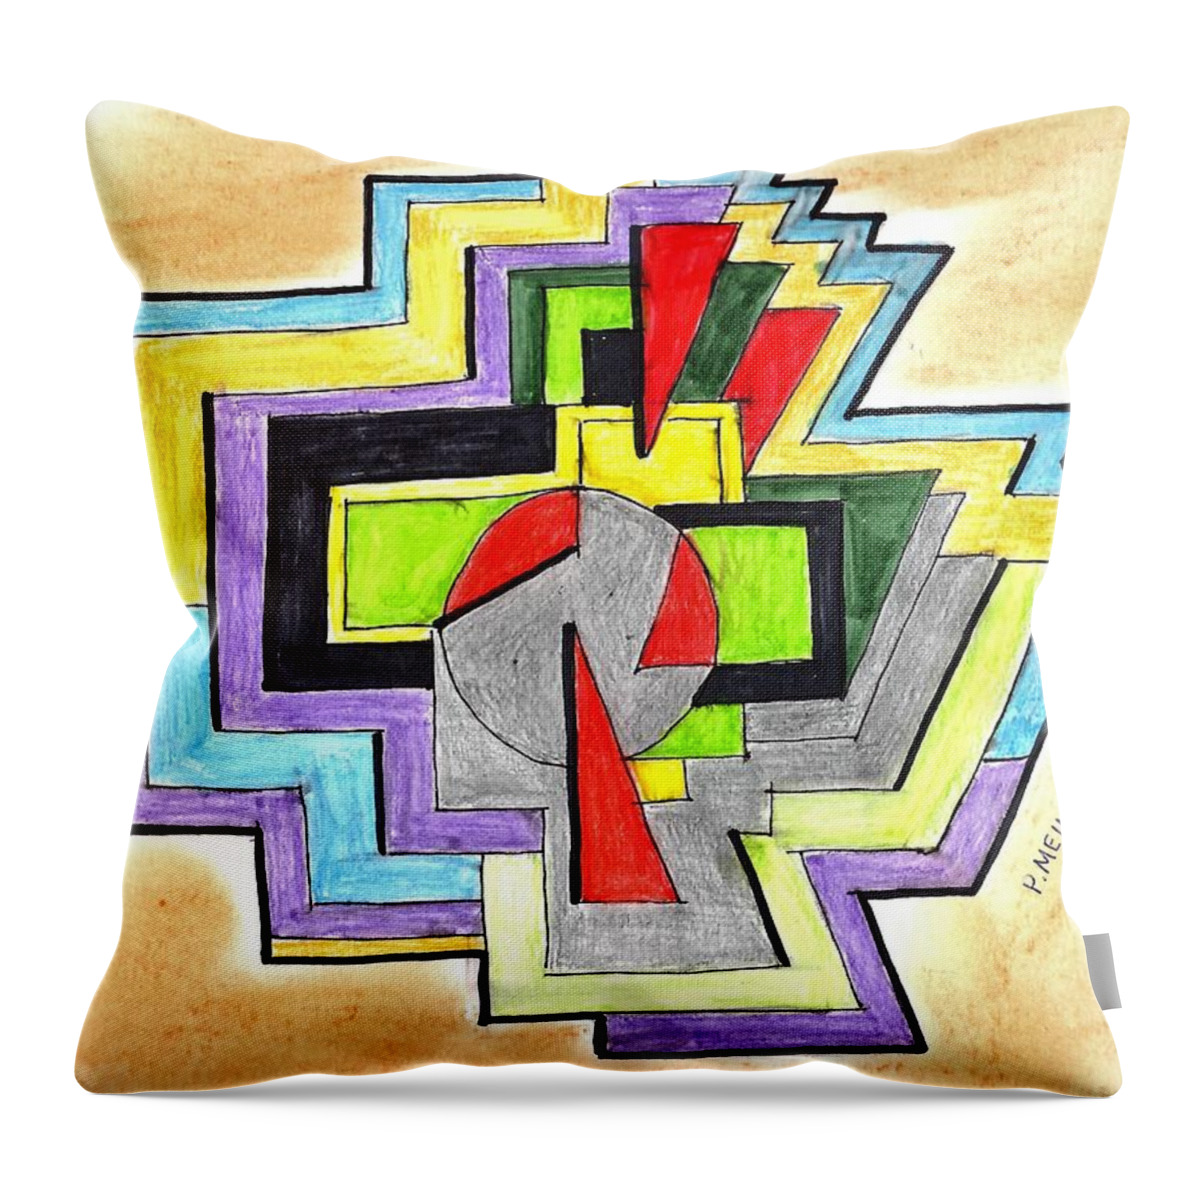 Drawings By Paul Meinerth Throw Pillow featuring the drawing The City by Paul Meinerth